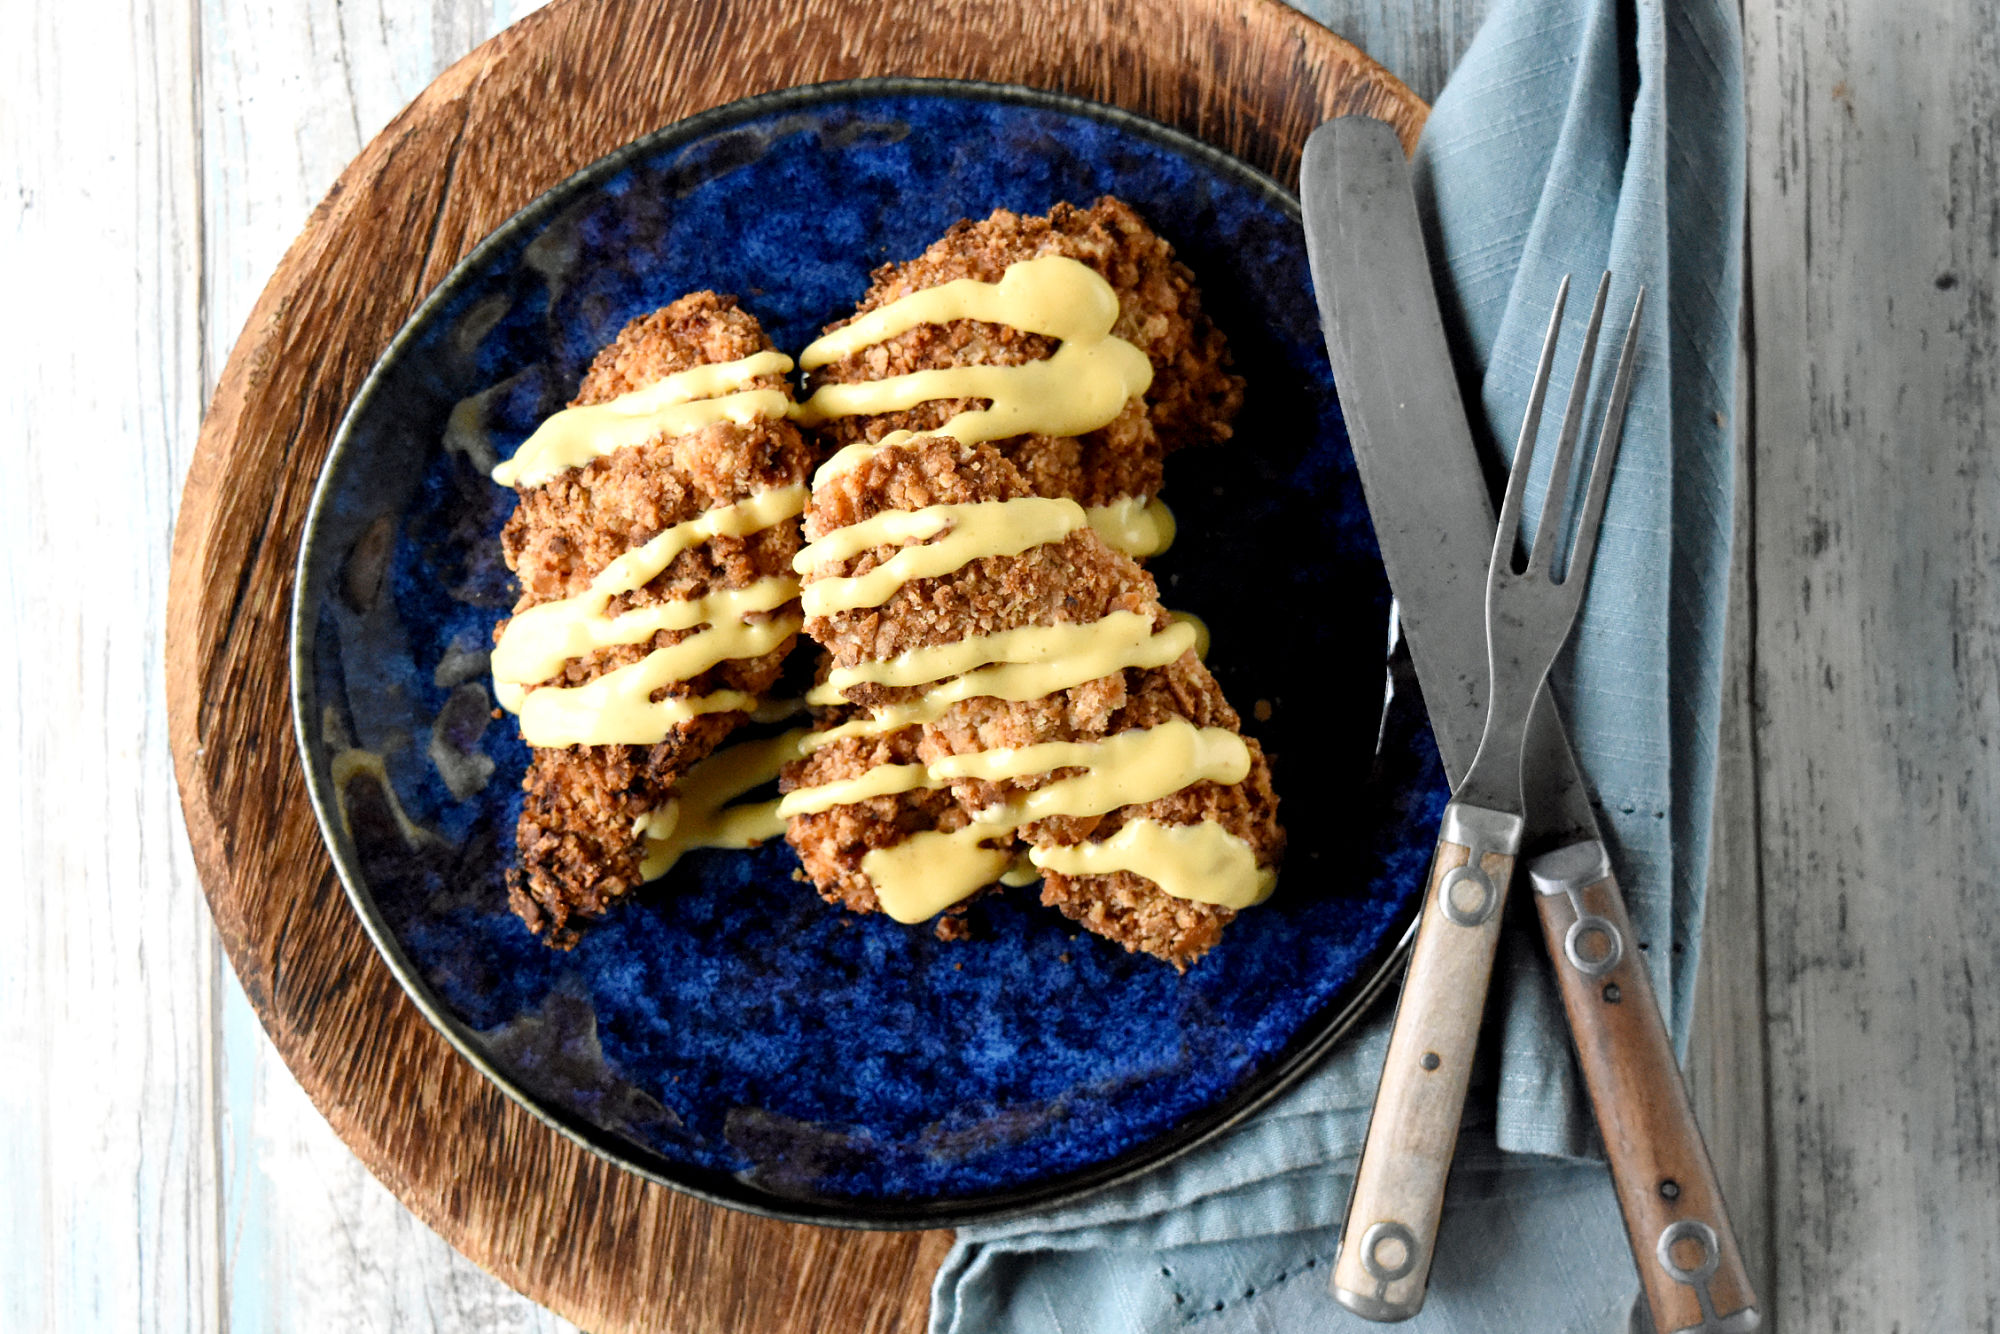 Jalapeno pretzel pieces coat tender chicken in these Jalapeno Pretzel Crusted Chicken Tenders. Cooked in the air fryer with a 3-layer coating technique, they are super crispy and packed with flavor. #OurFamilyTable #appetizer #chickenstrips #jalapenopretzels #pretzelday
